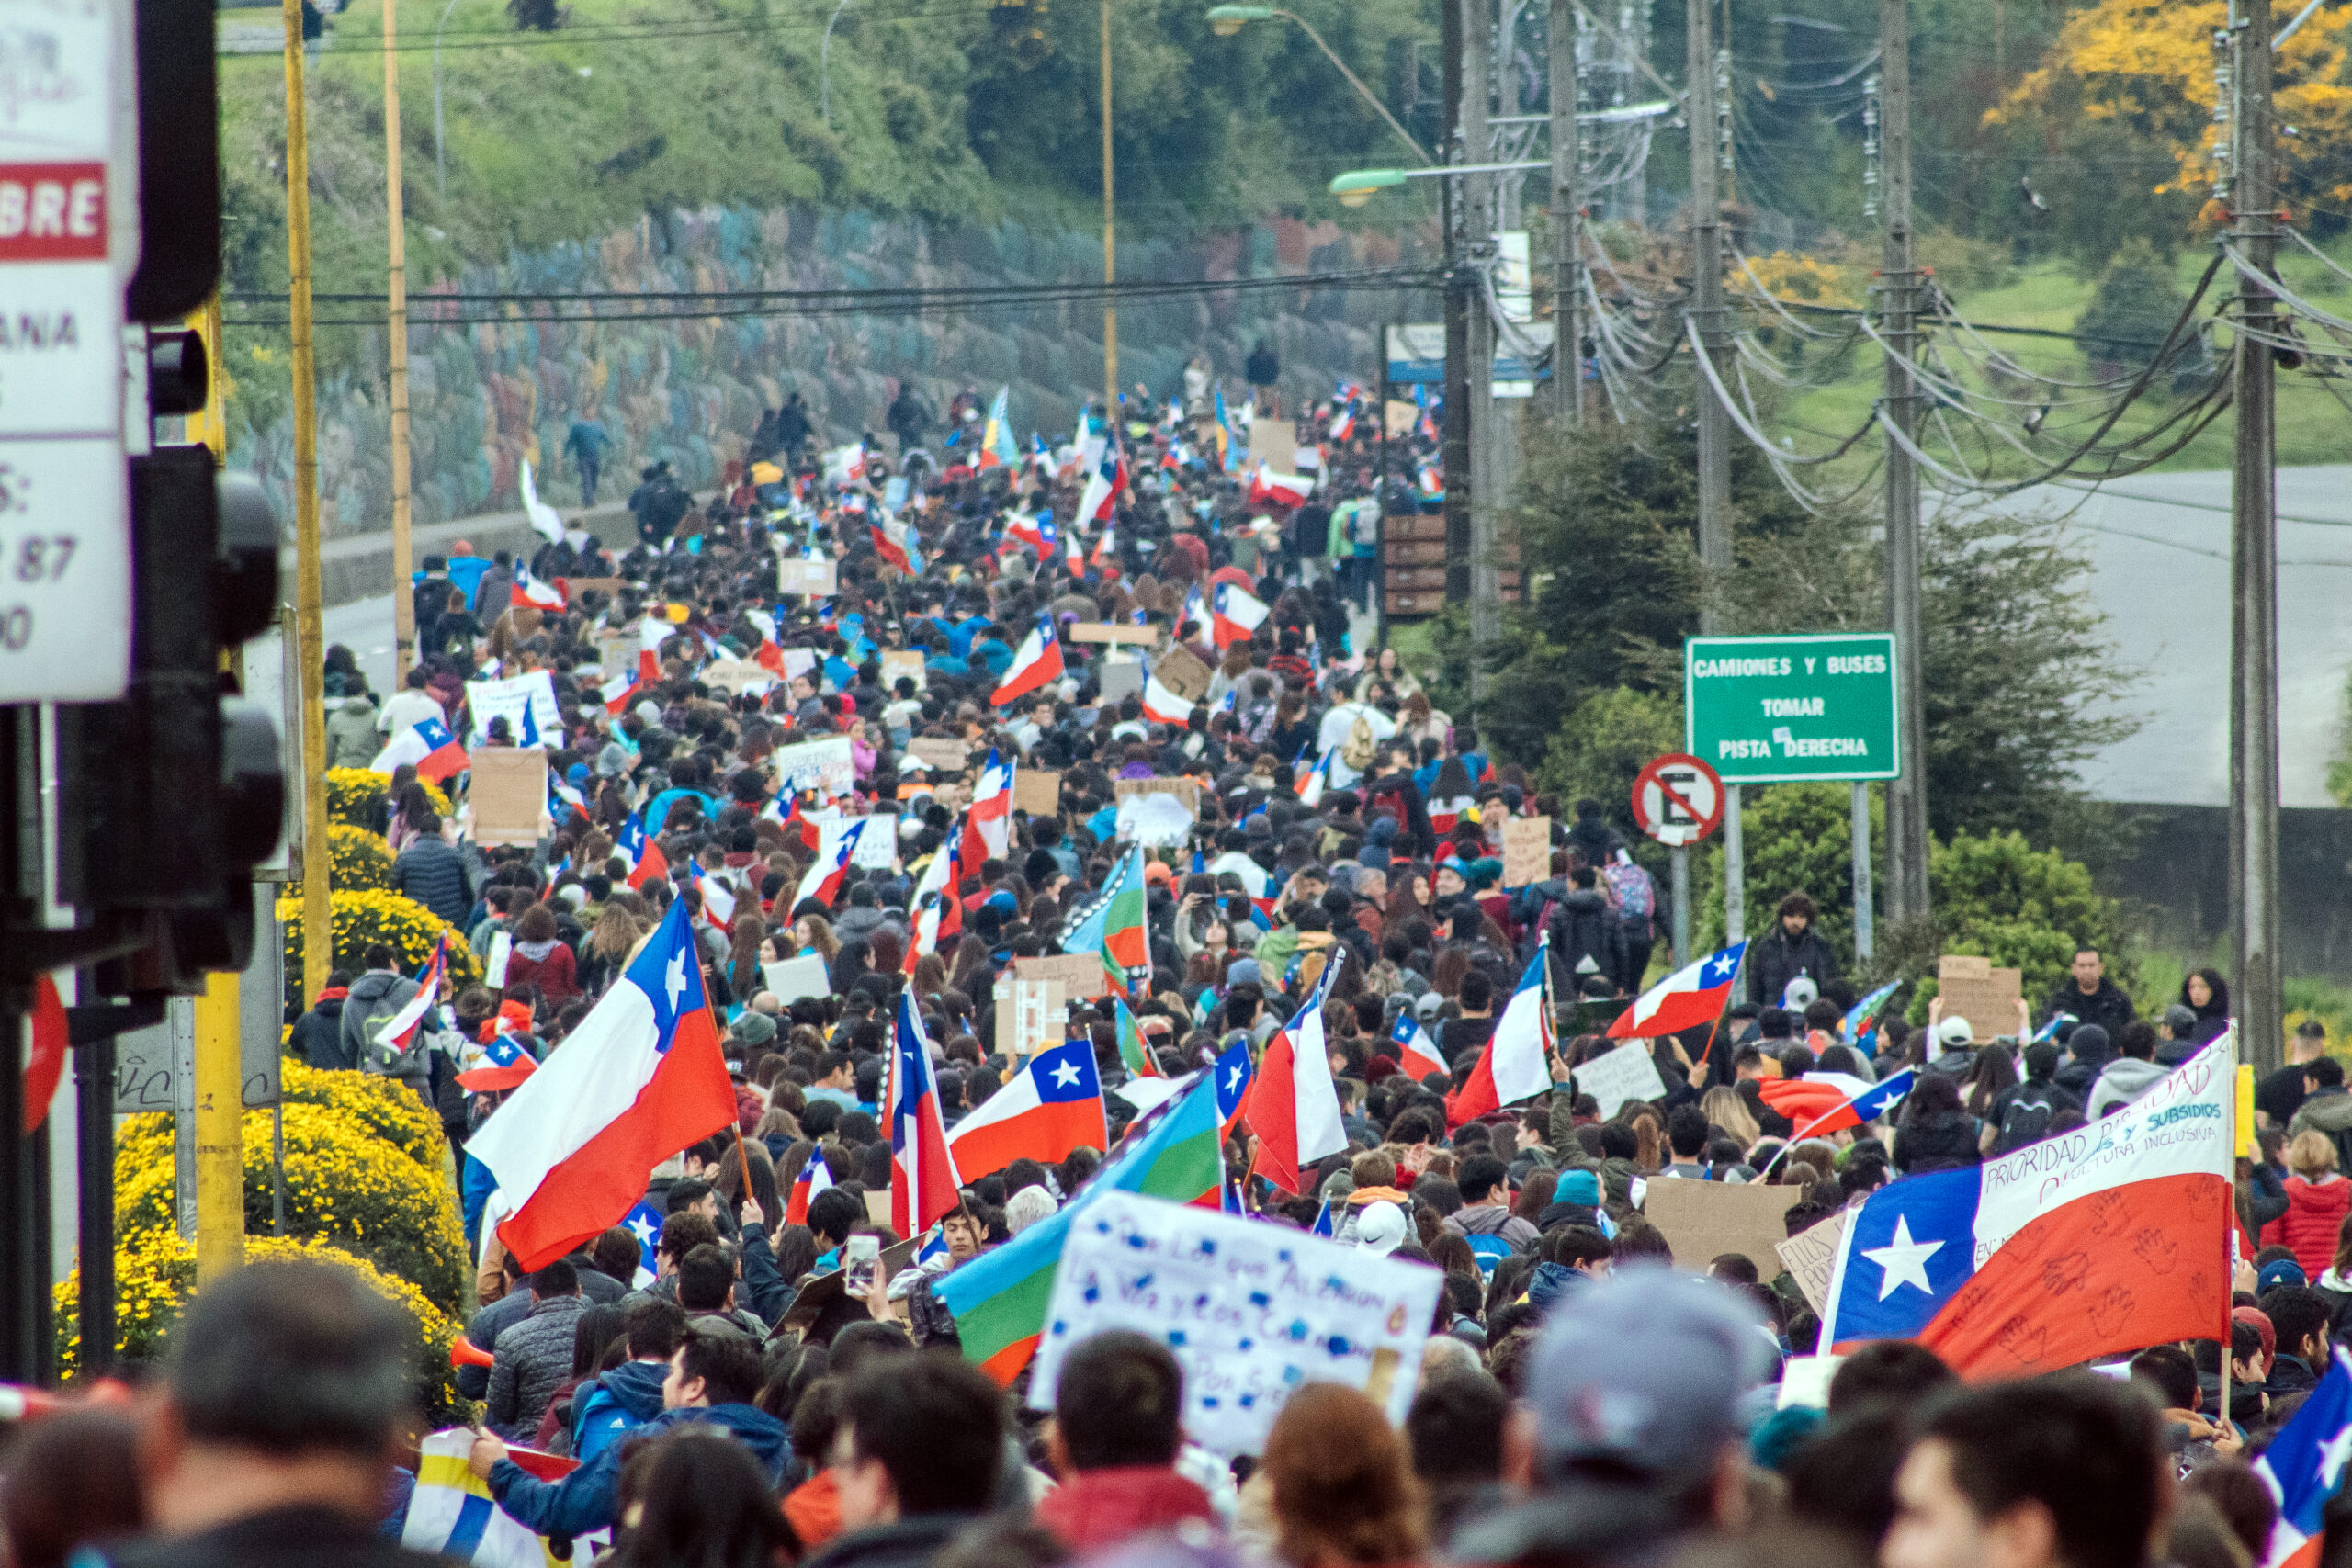 A group of people fill the street in protest. Some wavre the Chilean flag.